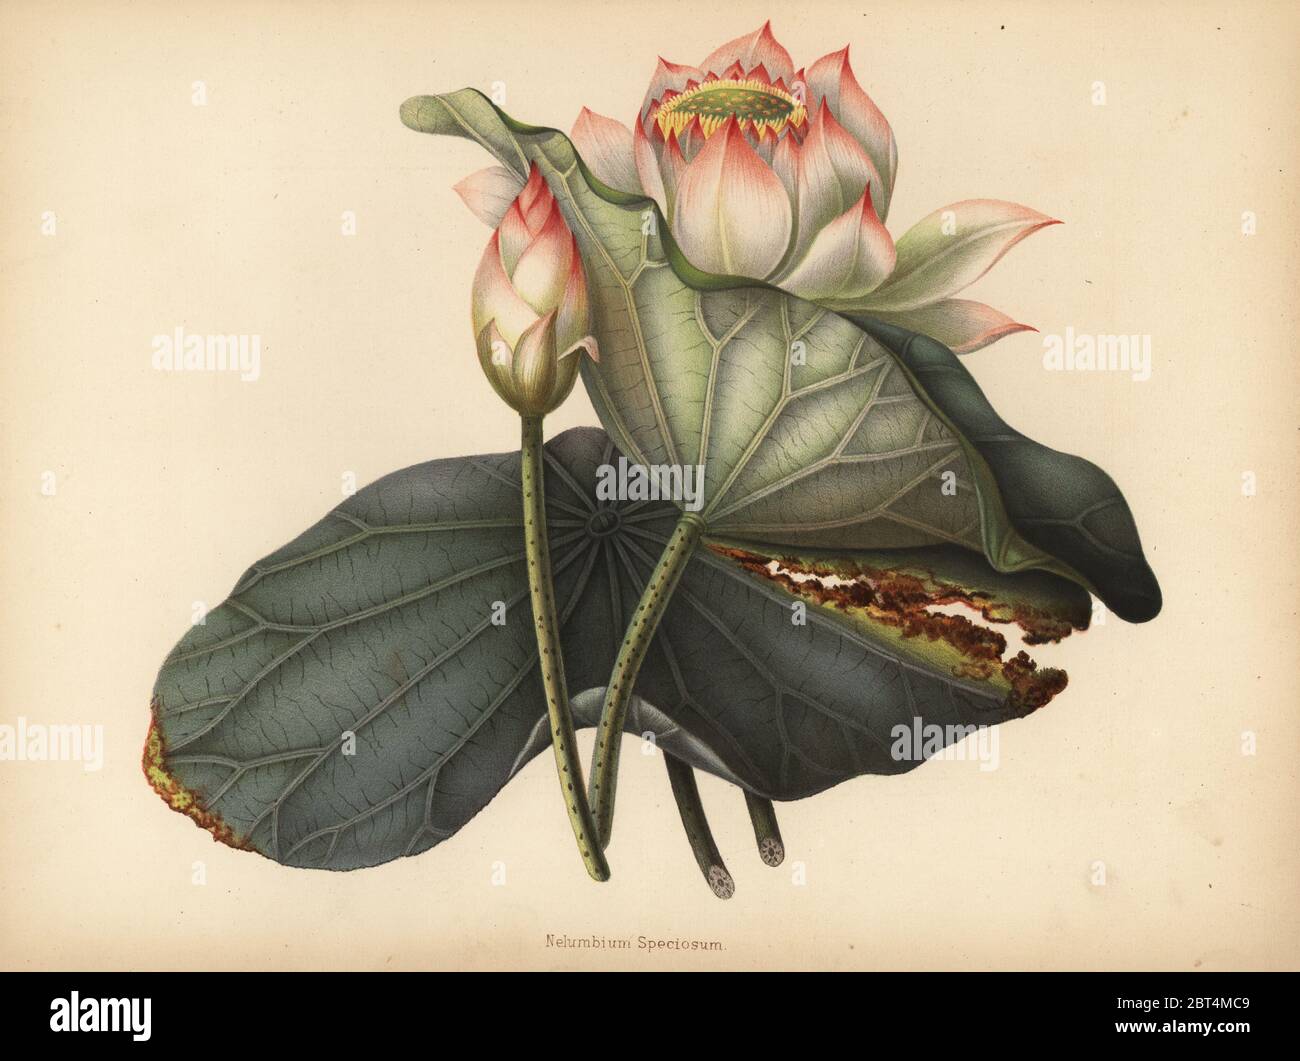 Indian lotus, Nelumbo nucifera (Nelumbium speciosum). Chromolithograph after a botanical drawing by Emily Eden from her Flowers from an Indian Garden: Second Series: Hope, Breidenbach & Co, Dusseldorf, 1860s. Eden was an English female aristocratic writer, novelist and traveler who accompanied her brother George in India from 1836 to 1842. Stock Photo